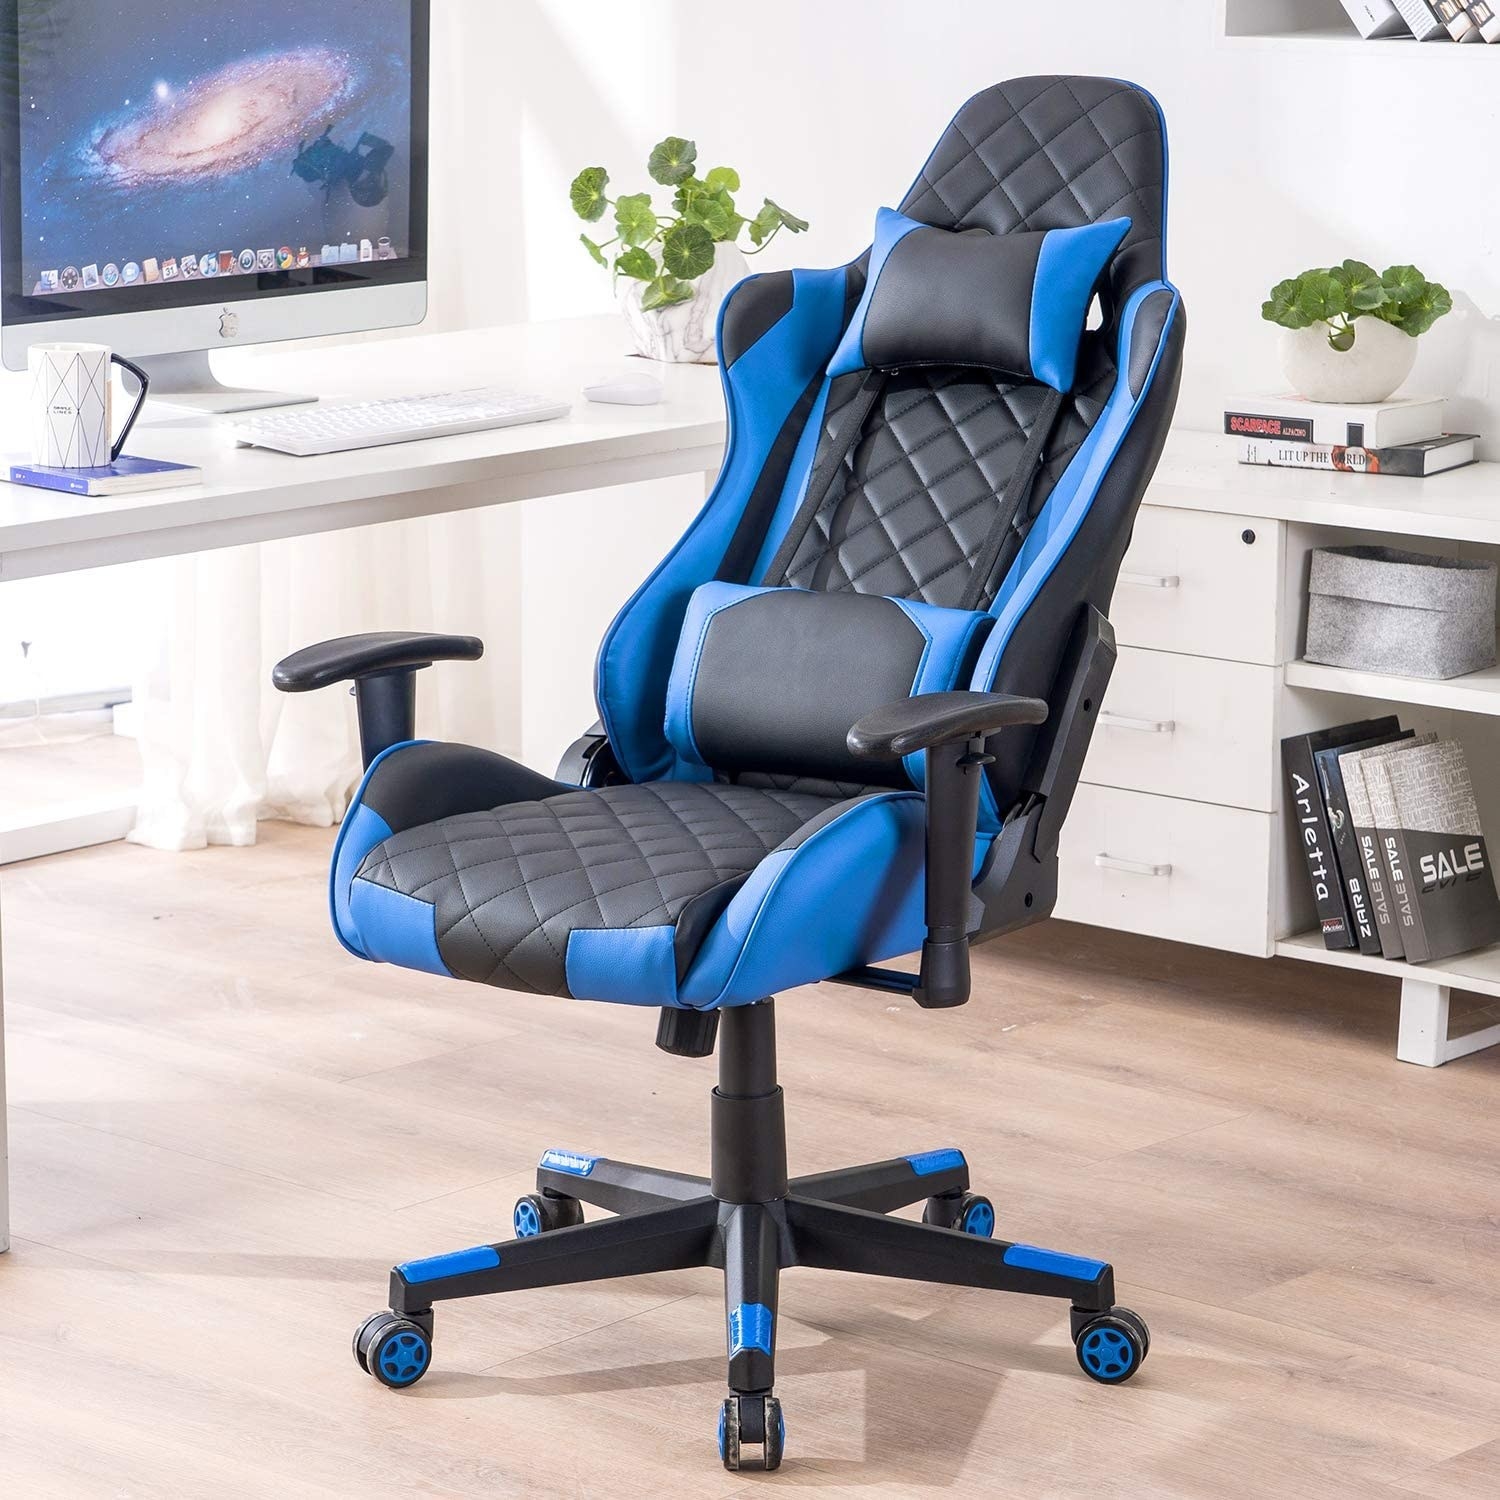 The ergonomic chair in an office 